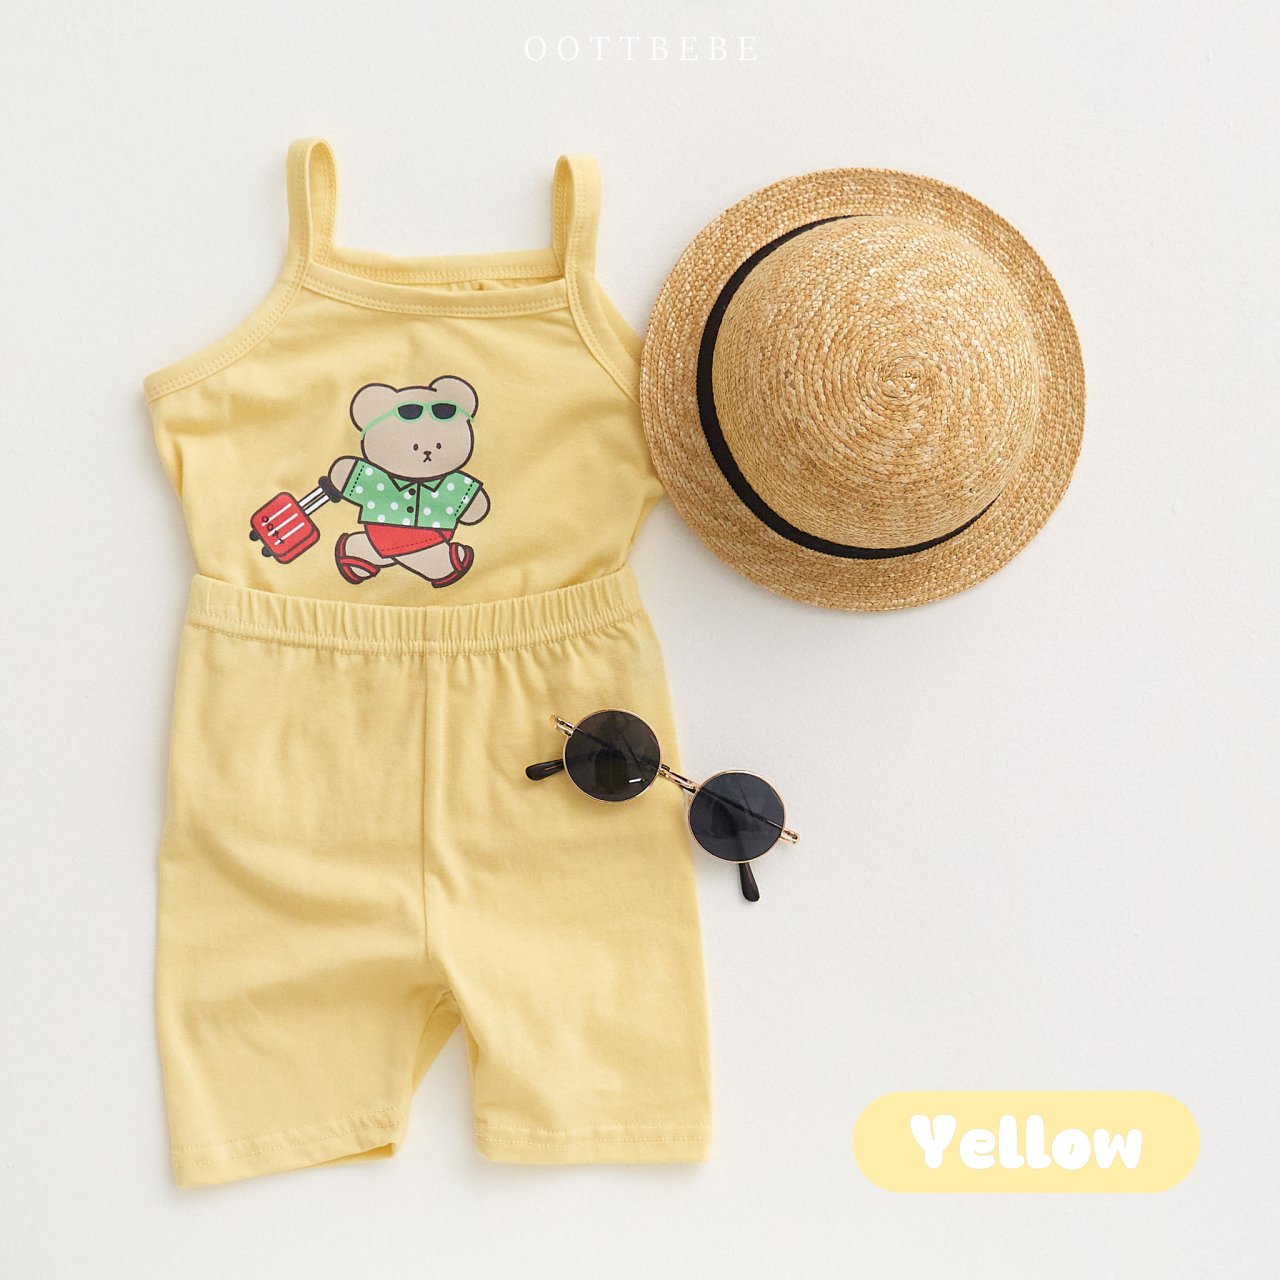 [Oottbebe] Vacation Home Wear Set